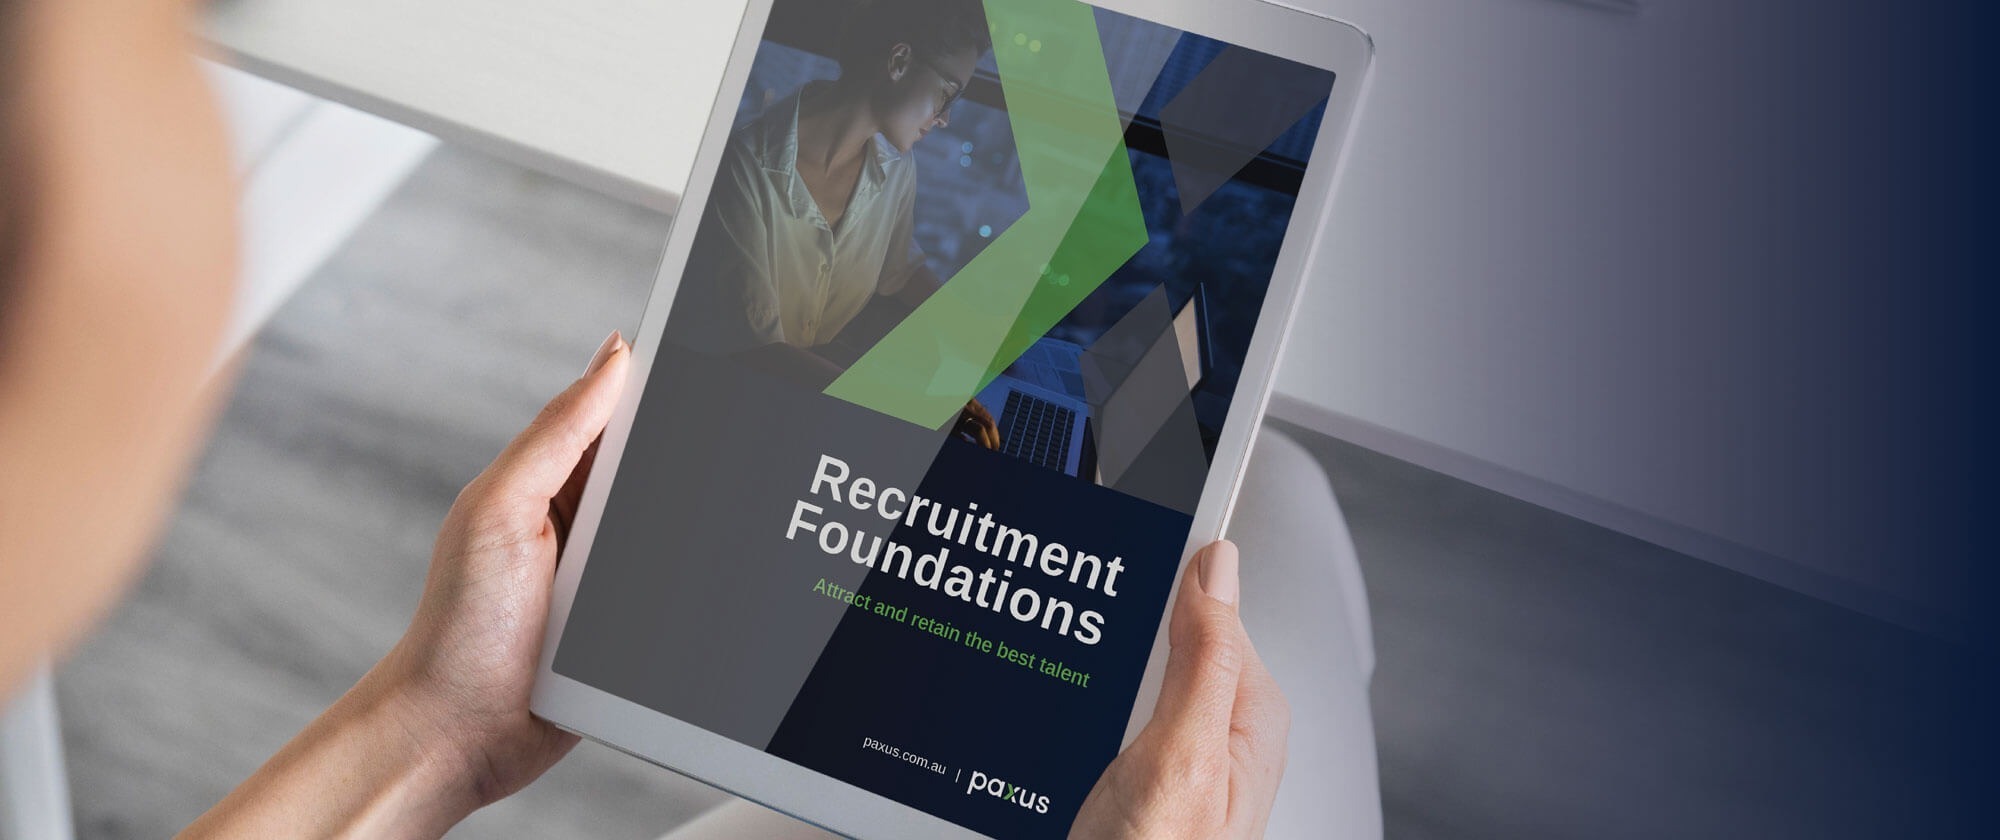 A person holding a tablet displaying a cover of an e-book titled 'recruitment foundations,' which features a professional recruitment theme.